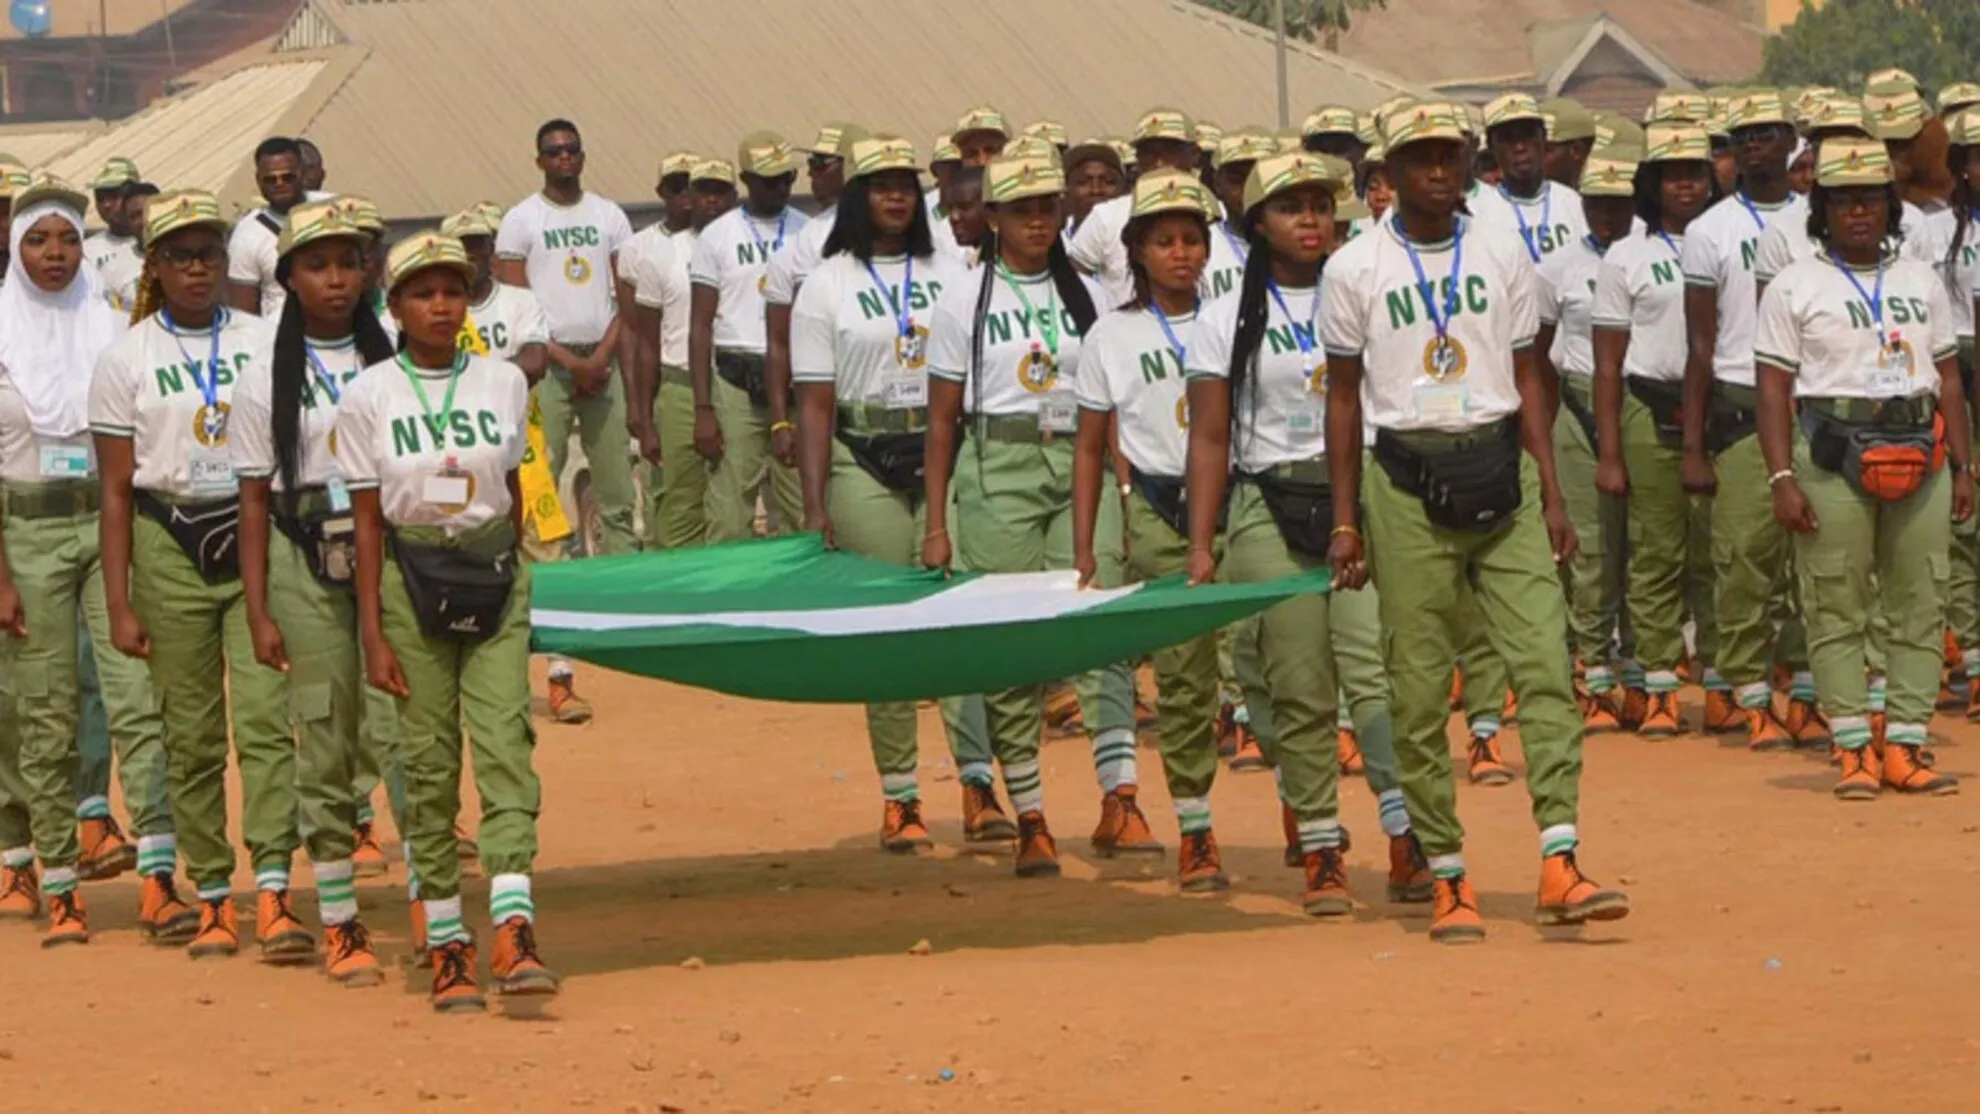 NYSC issues warning to Corp members as Insecurity Issues Increases, NYSC issues warning to Corp members as Insecurity Issues Increases, INFINITY LOADED